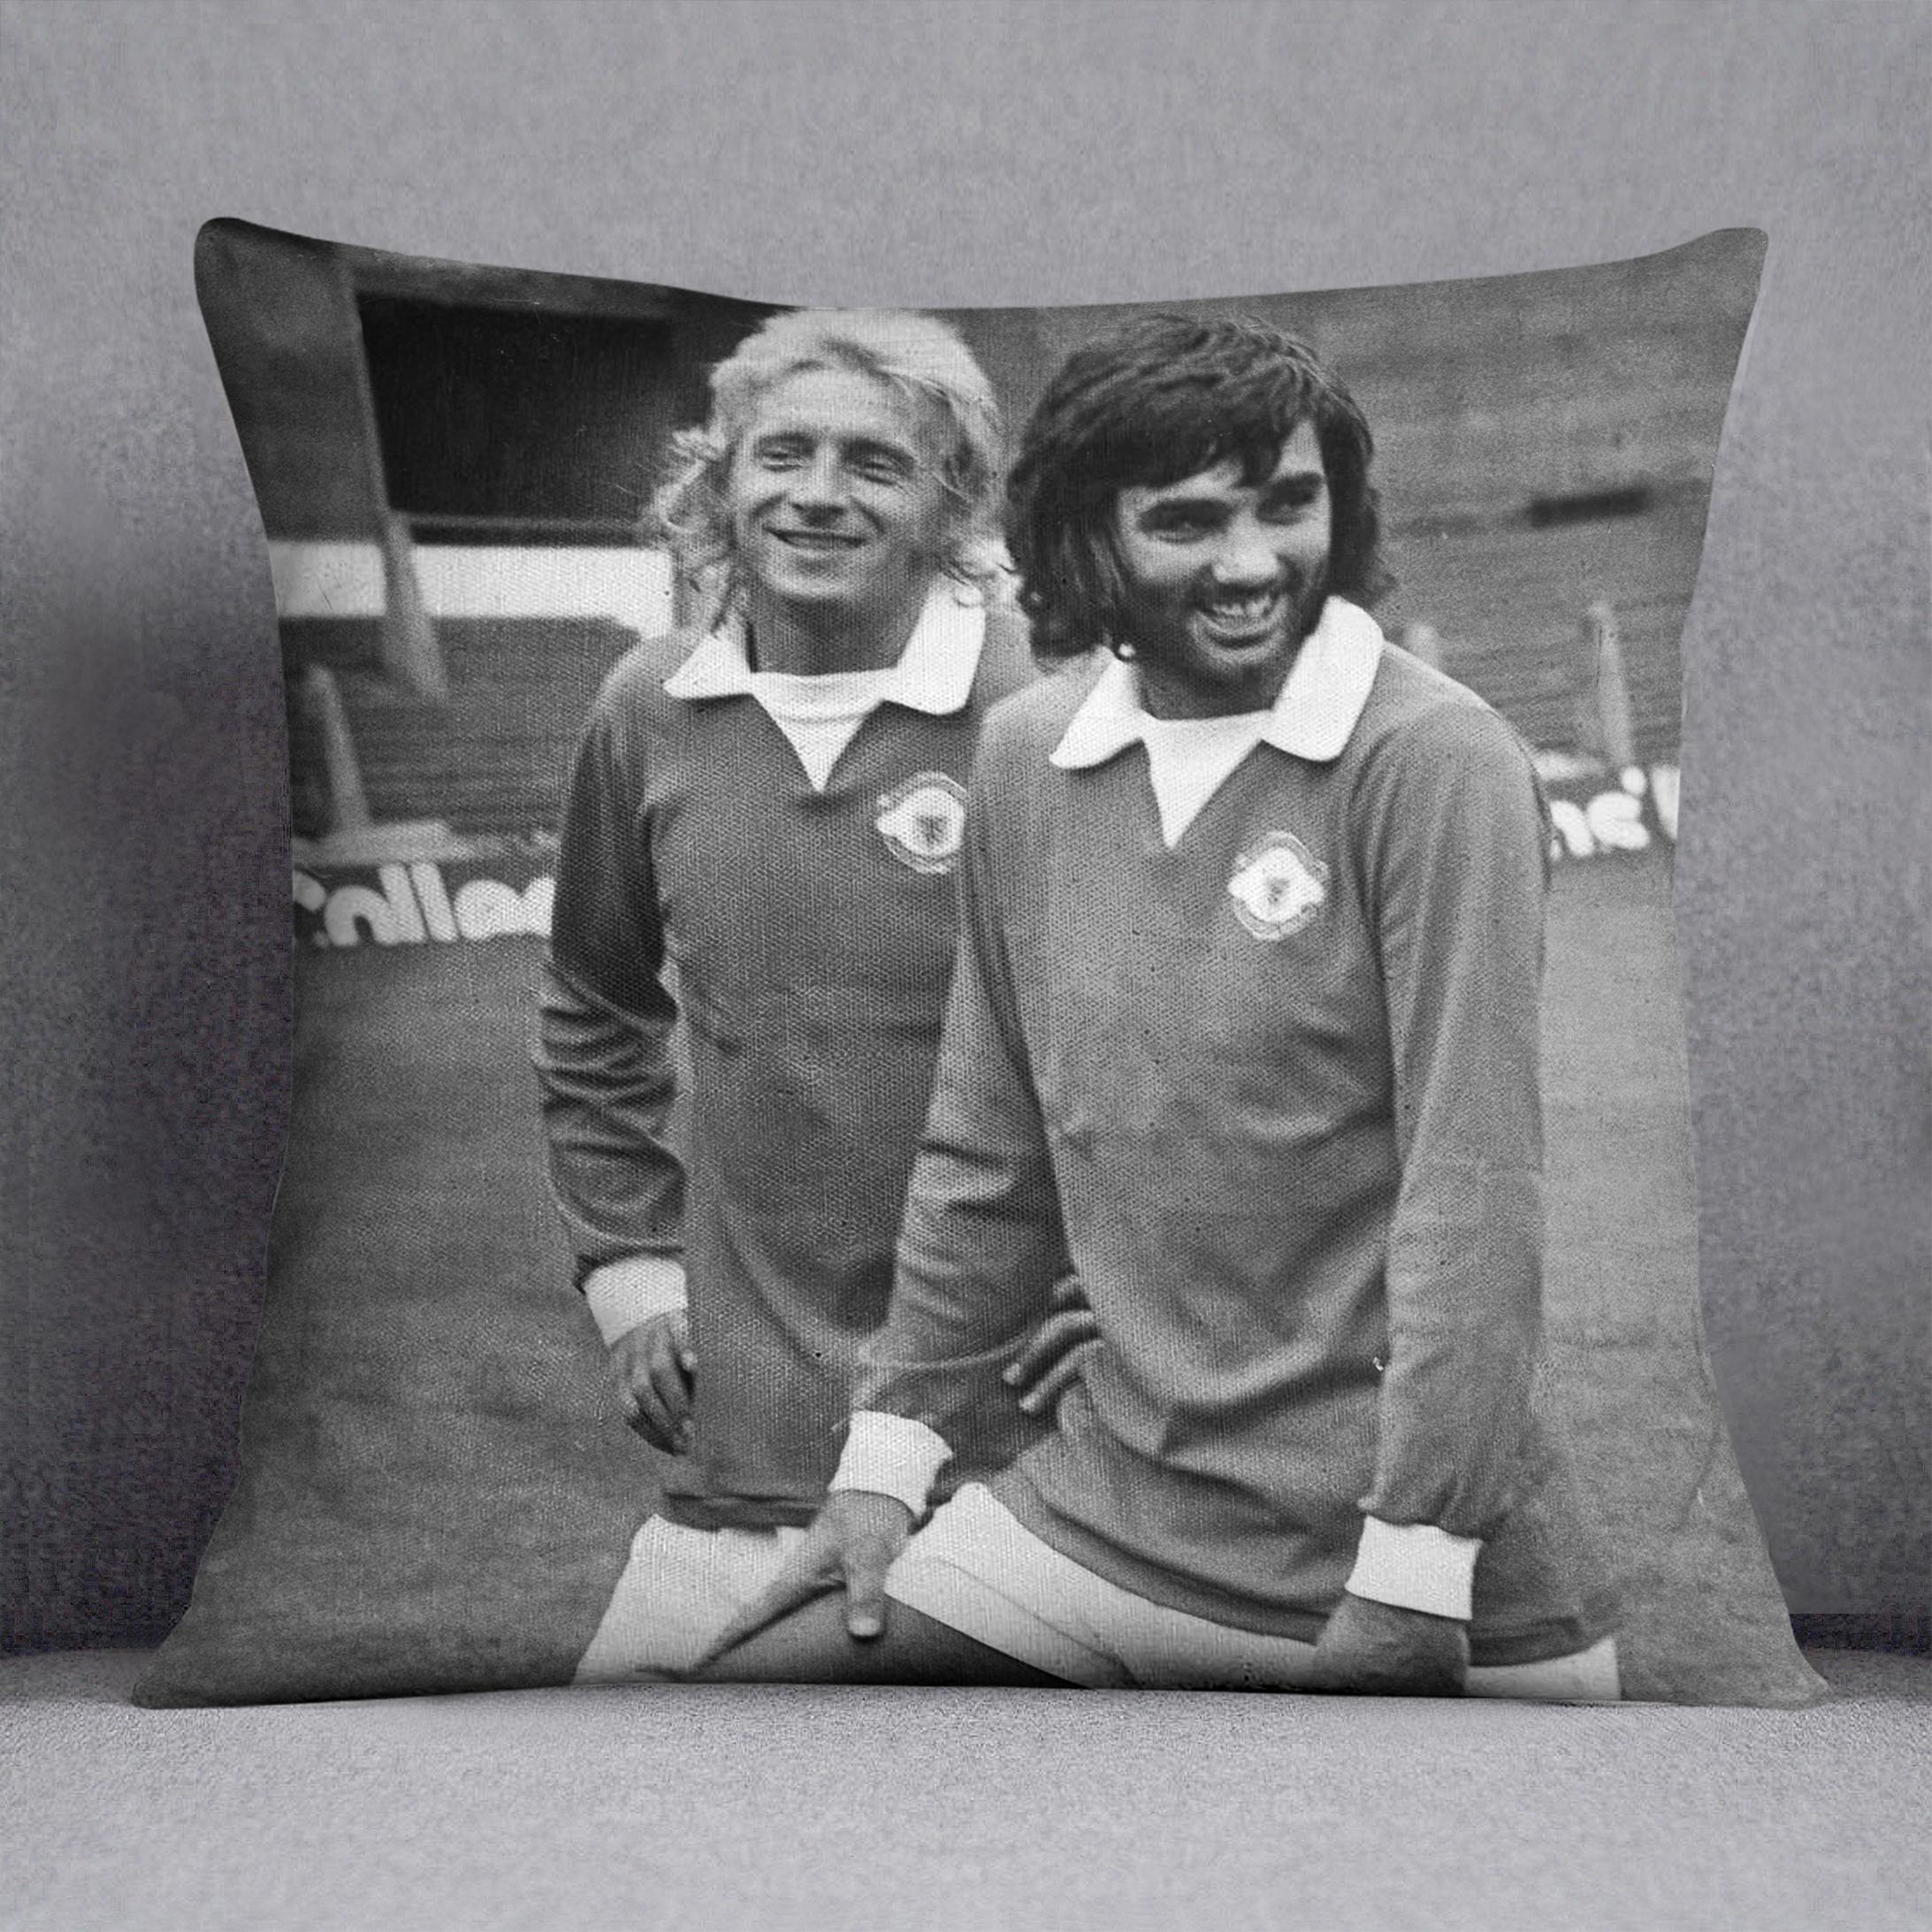 Denis Law and George Best in 1972 Cushion - Canvas Art Rocks - 1